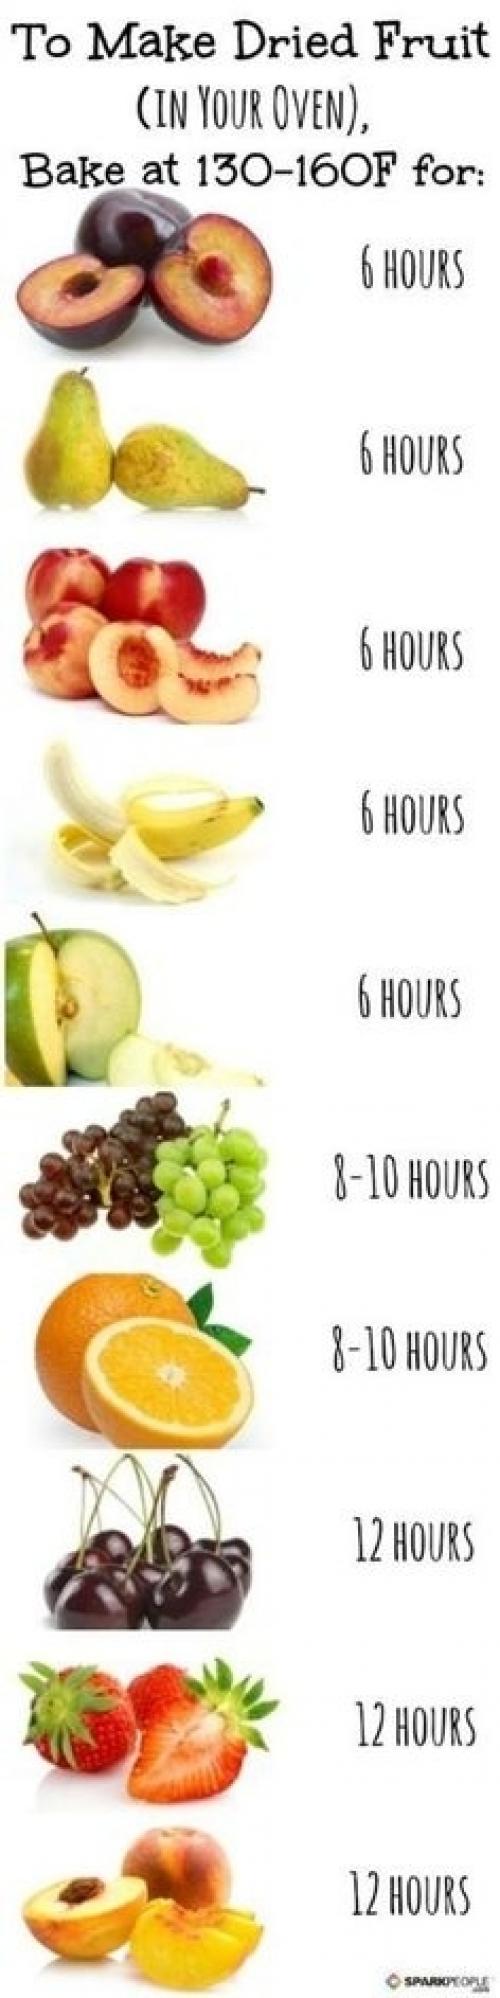 the-14-fruit-hacks-that-will-simplify-your-life-41